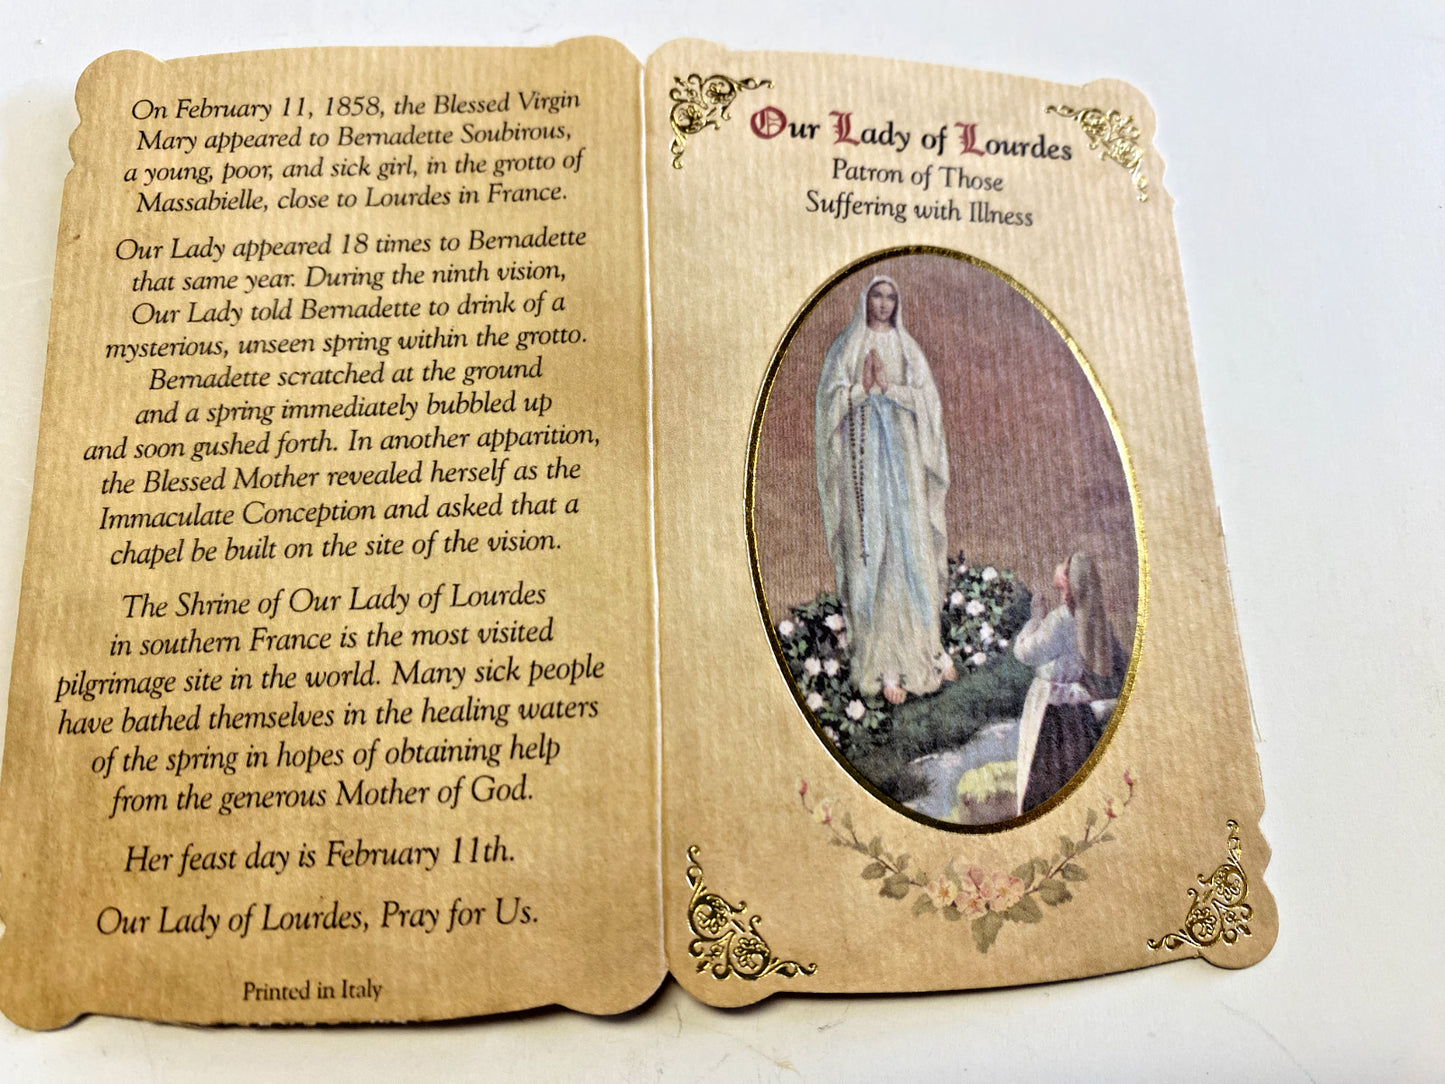 Our Lady of Lourdes "Suffering Illness Prayer" Card + Medal, New from Italy - Bob and Penny Lord